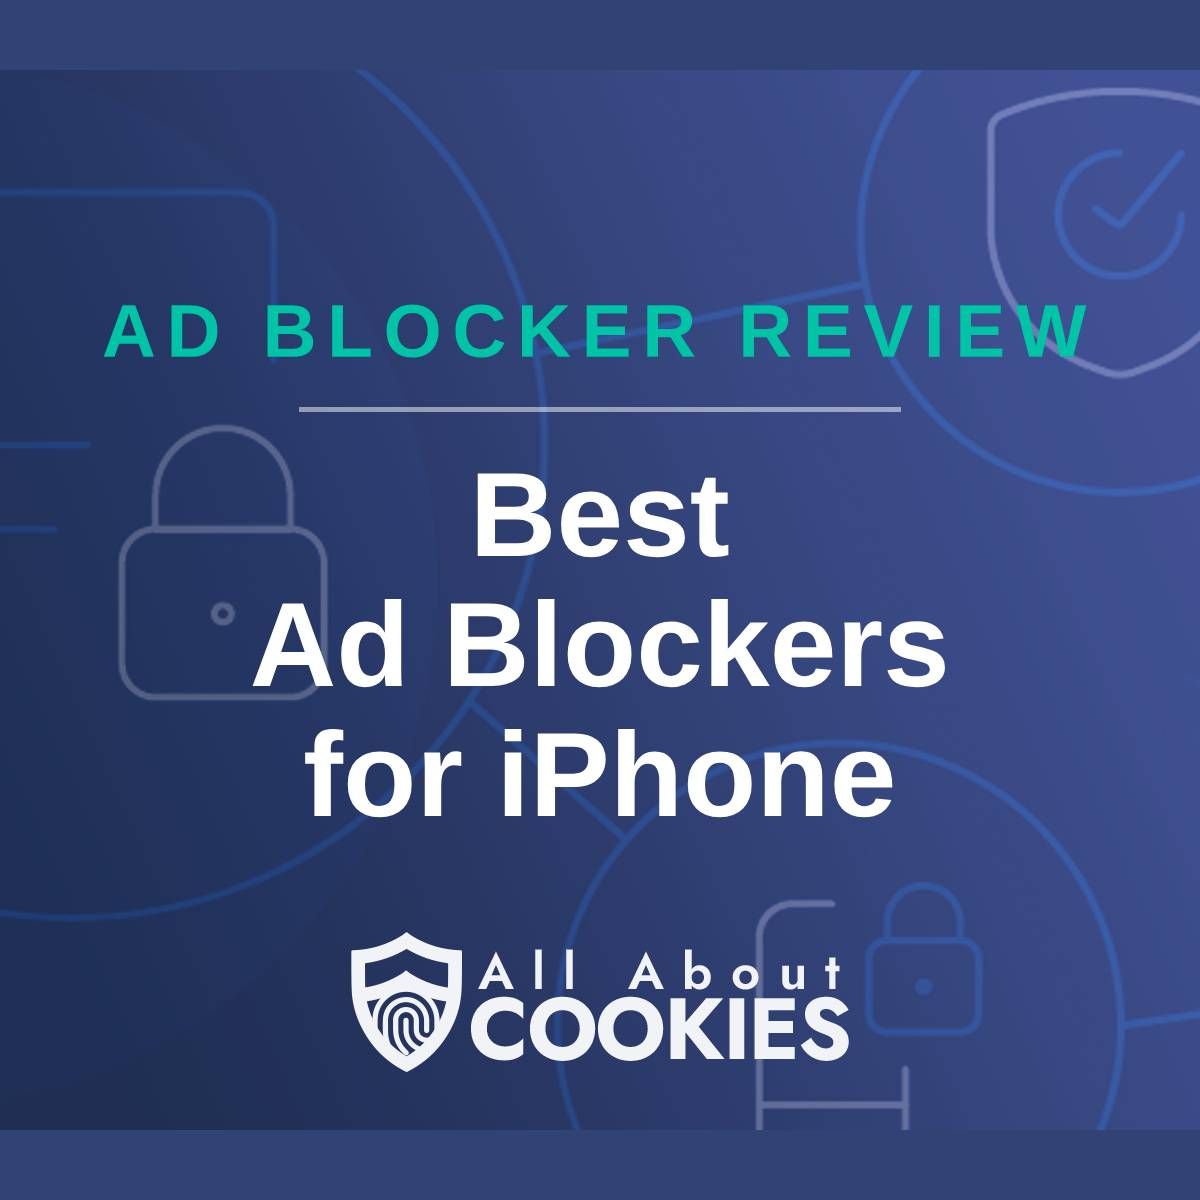 A blue background with images of locks and shields with the text &quot;Ad Blocker Review Best Ad Blockers for iPhone&quot; and the All About Cookies logo. 